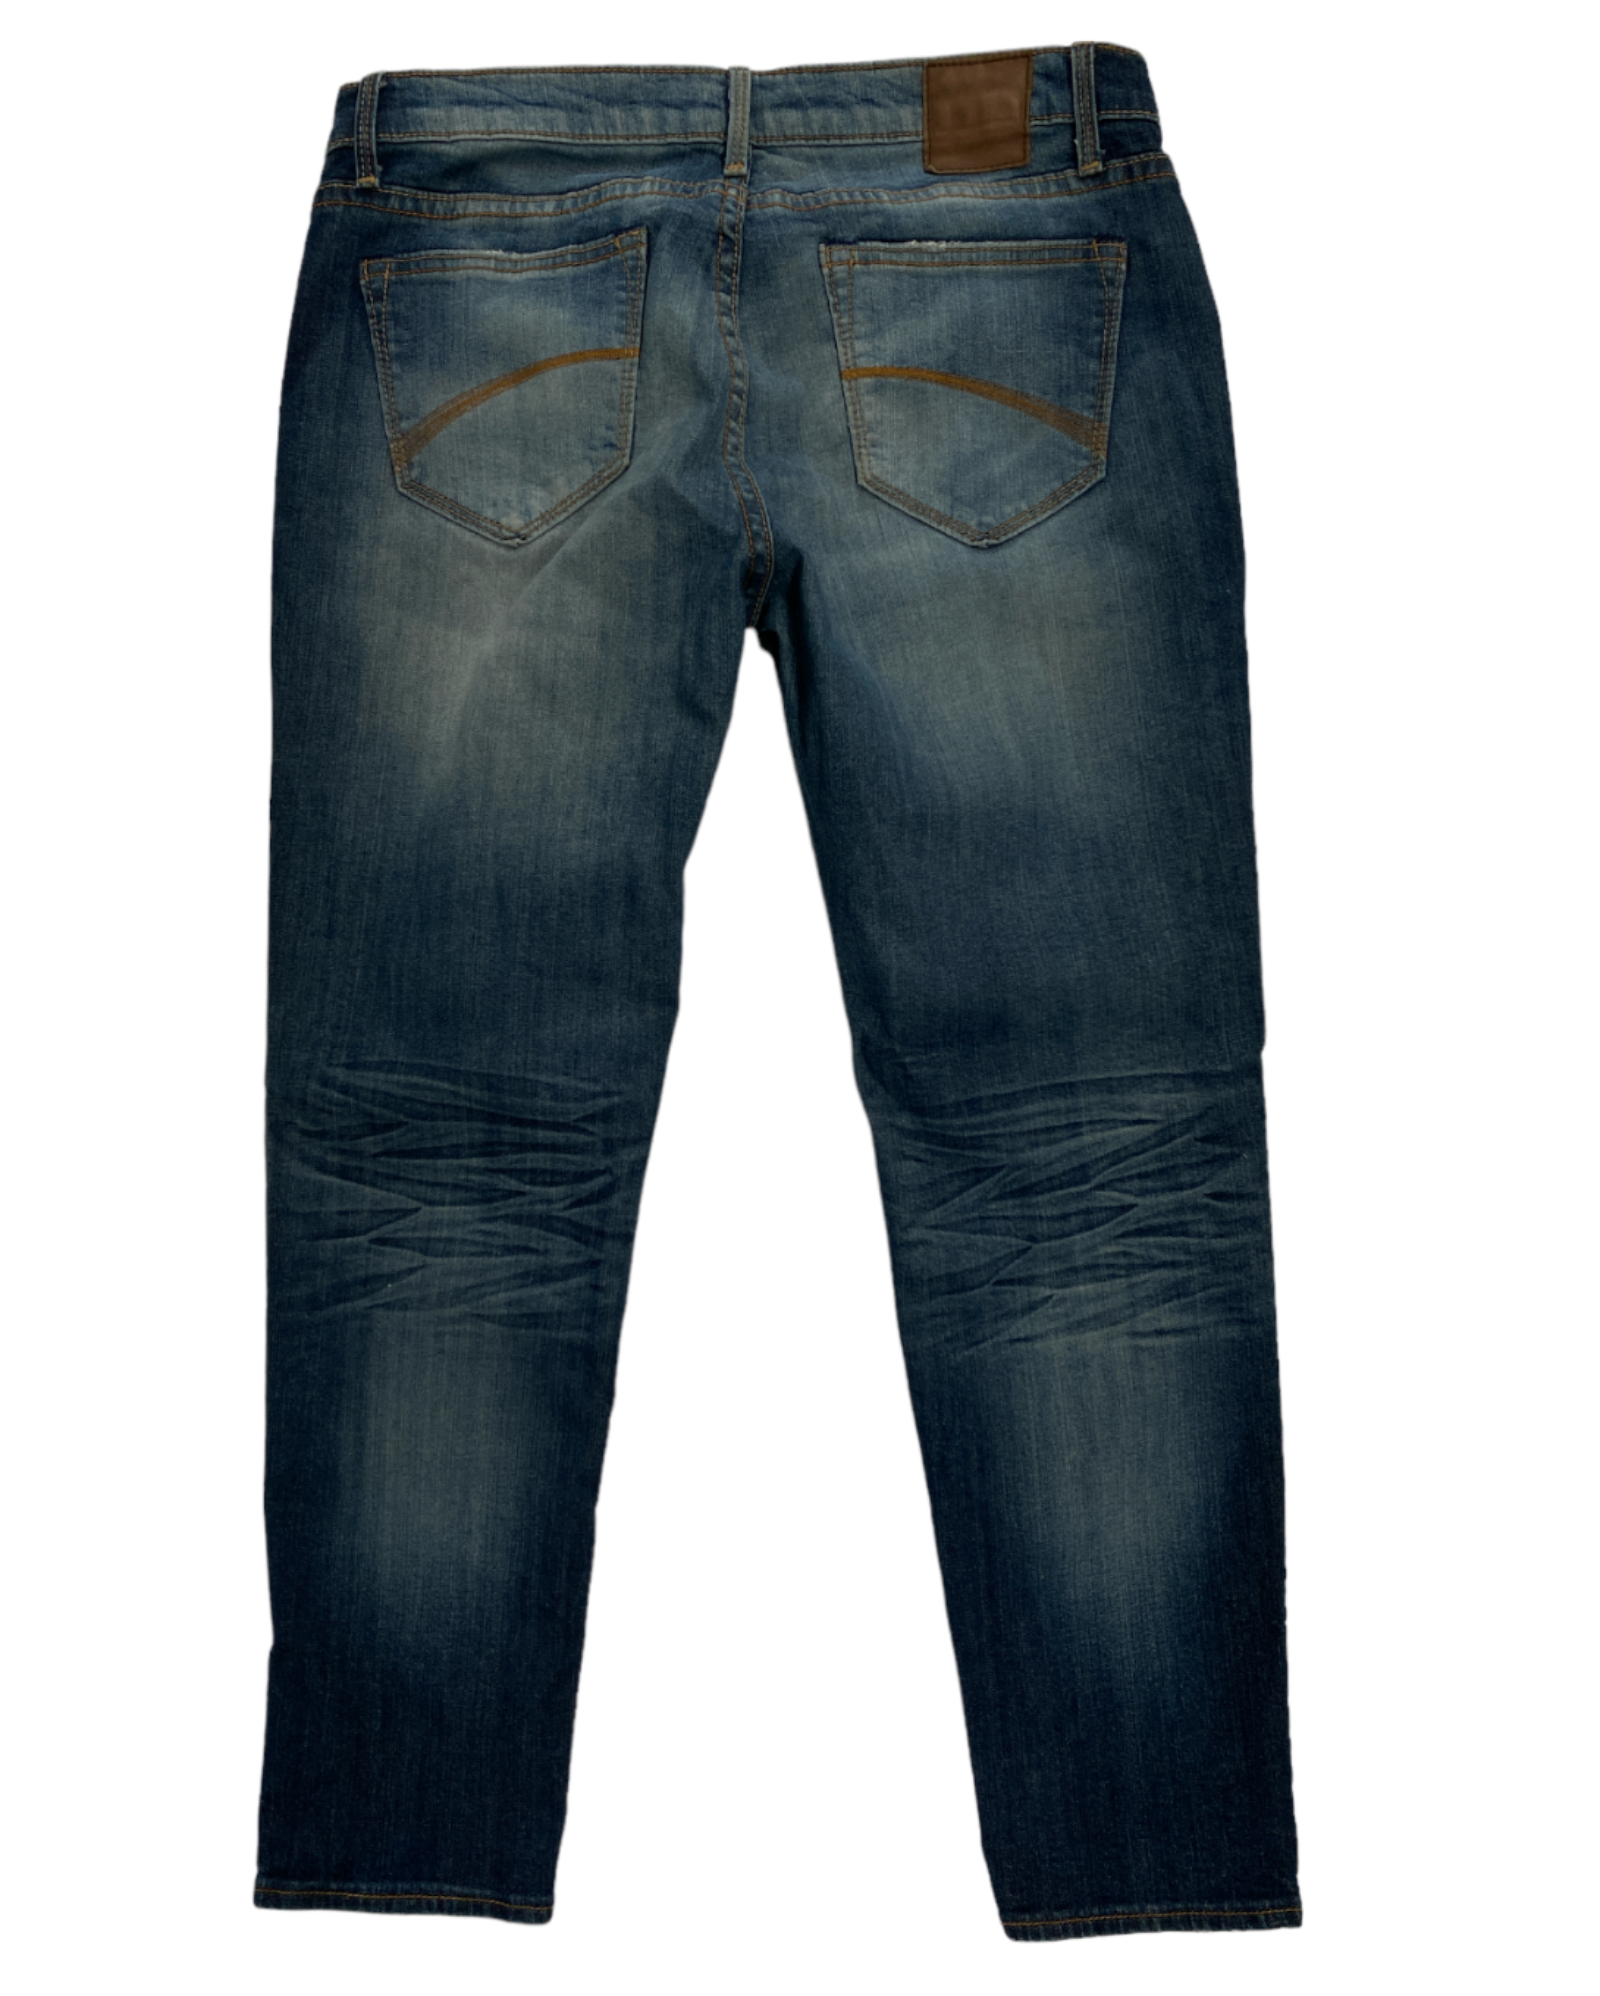 Jeans Rectos Driftwood